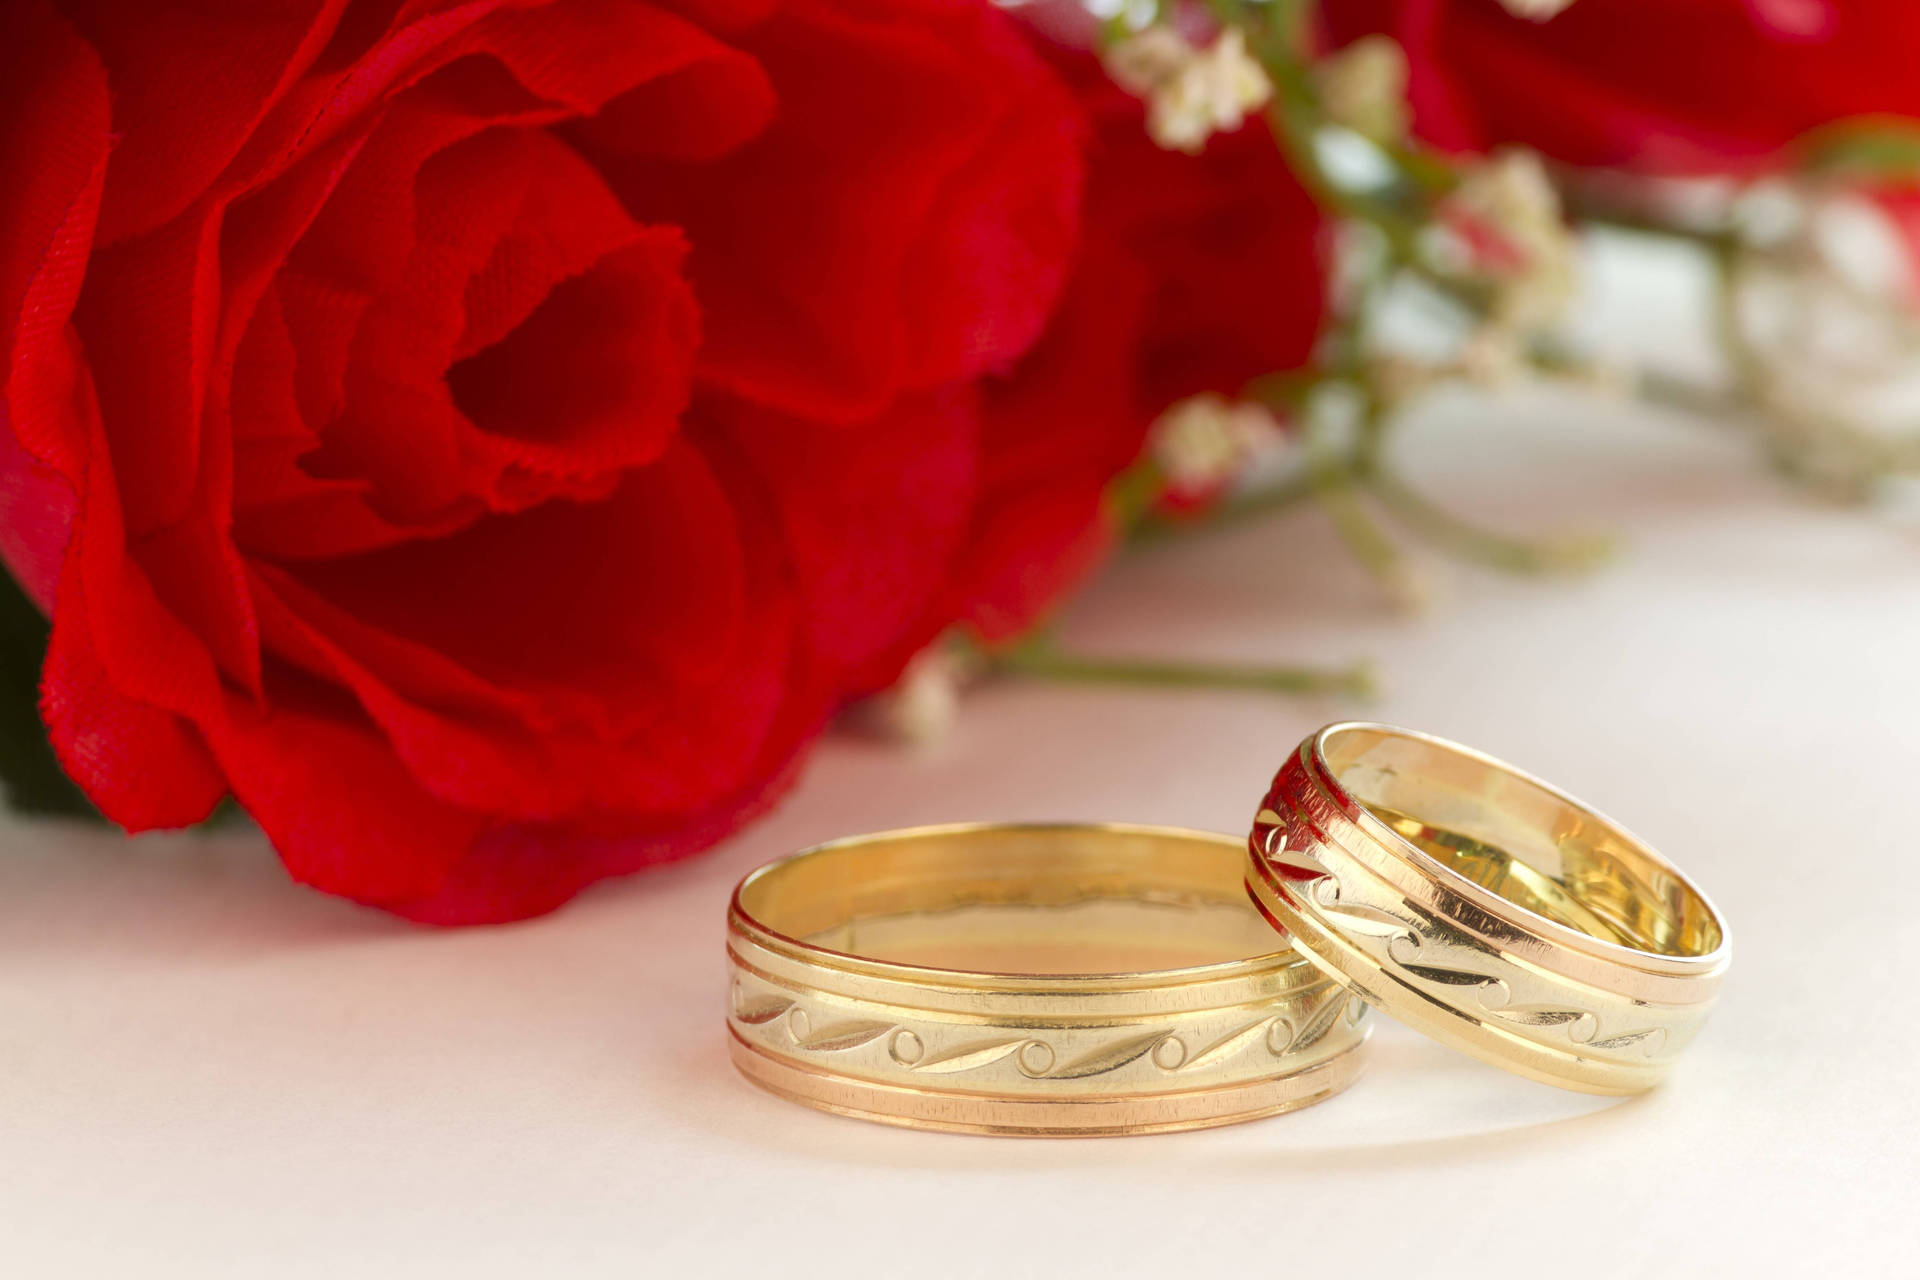 Wedding Rings 5184X3456 Wallpaper and Background Image